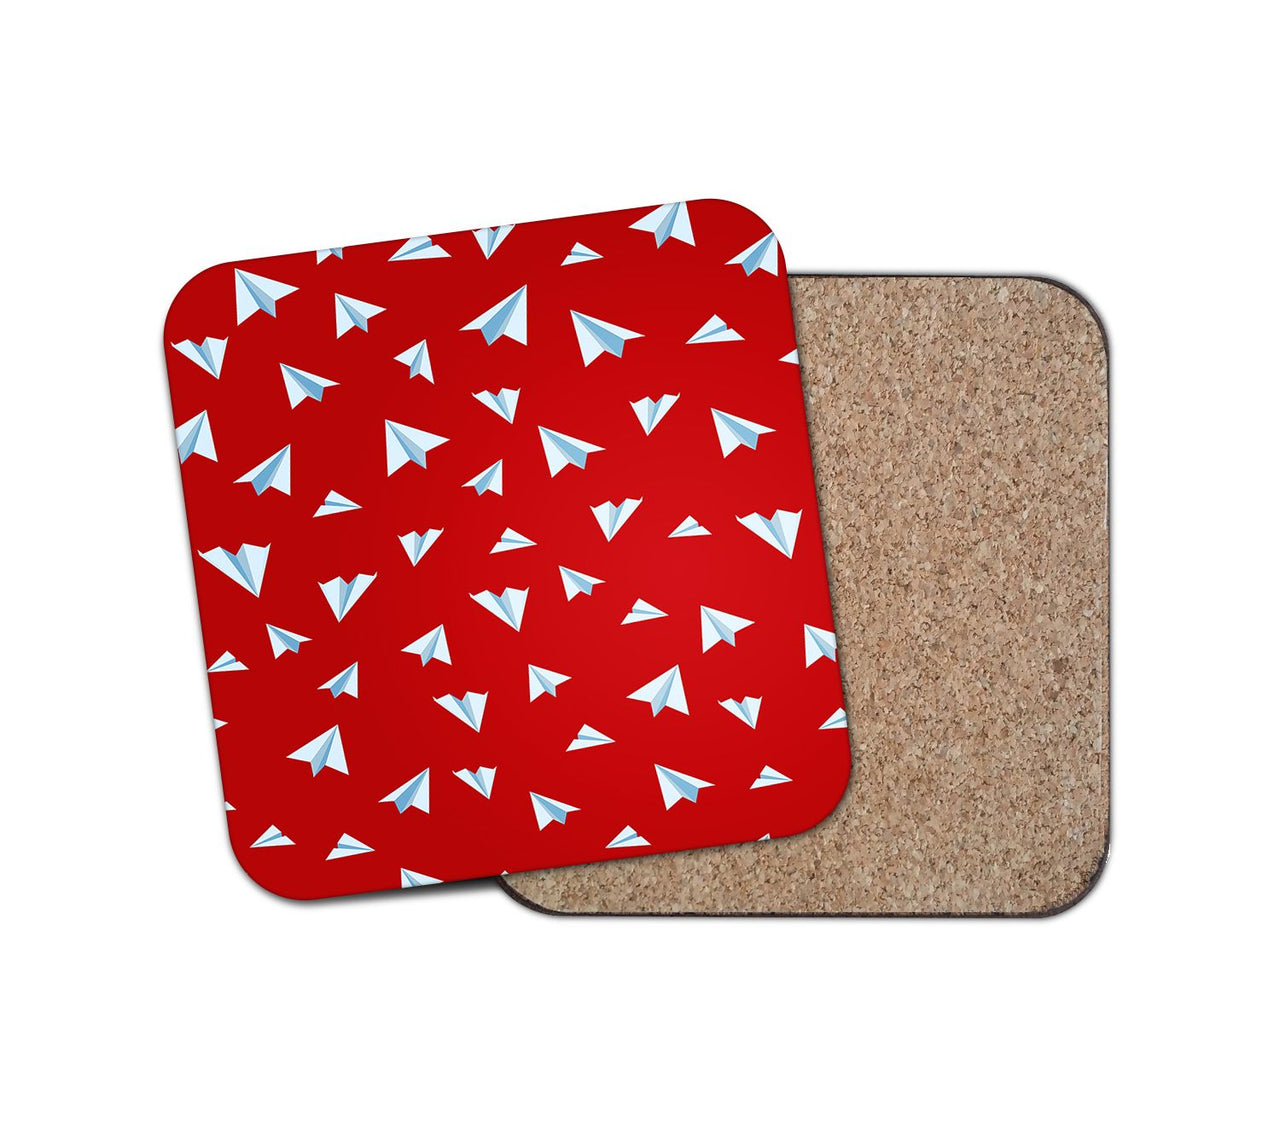 Paper Airplanes (Red) Designed Coasters